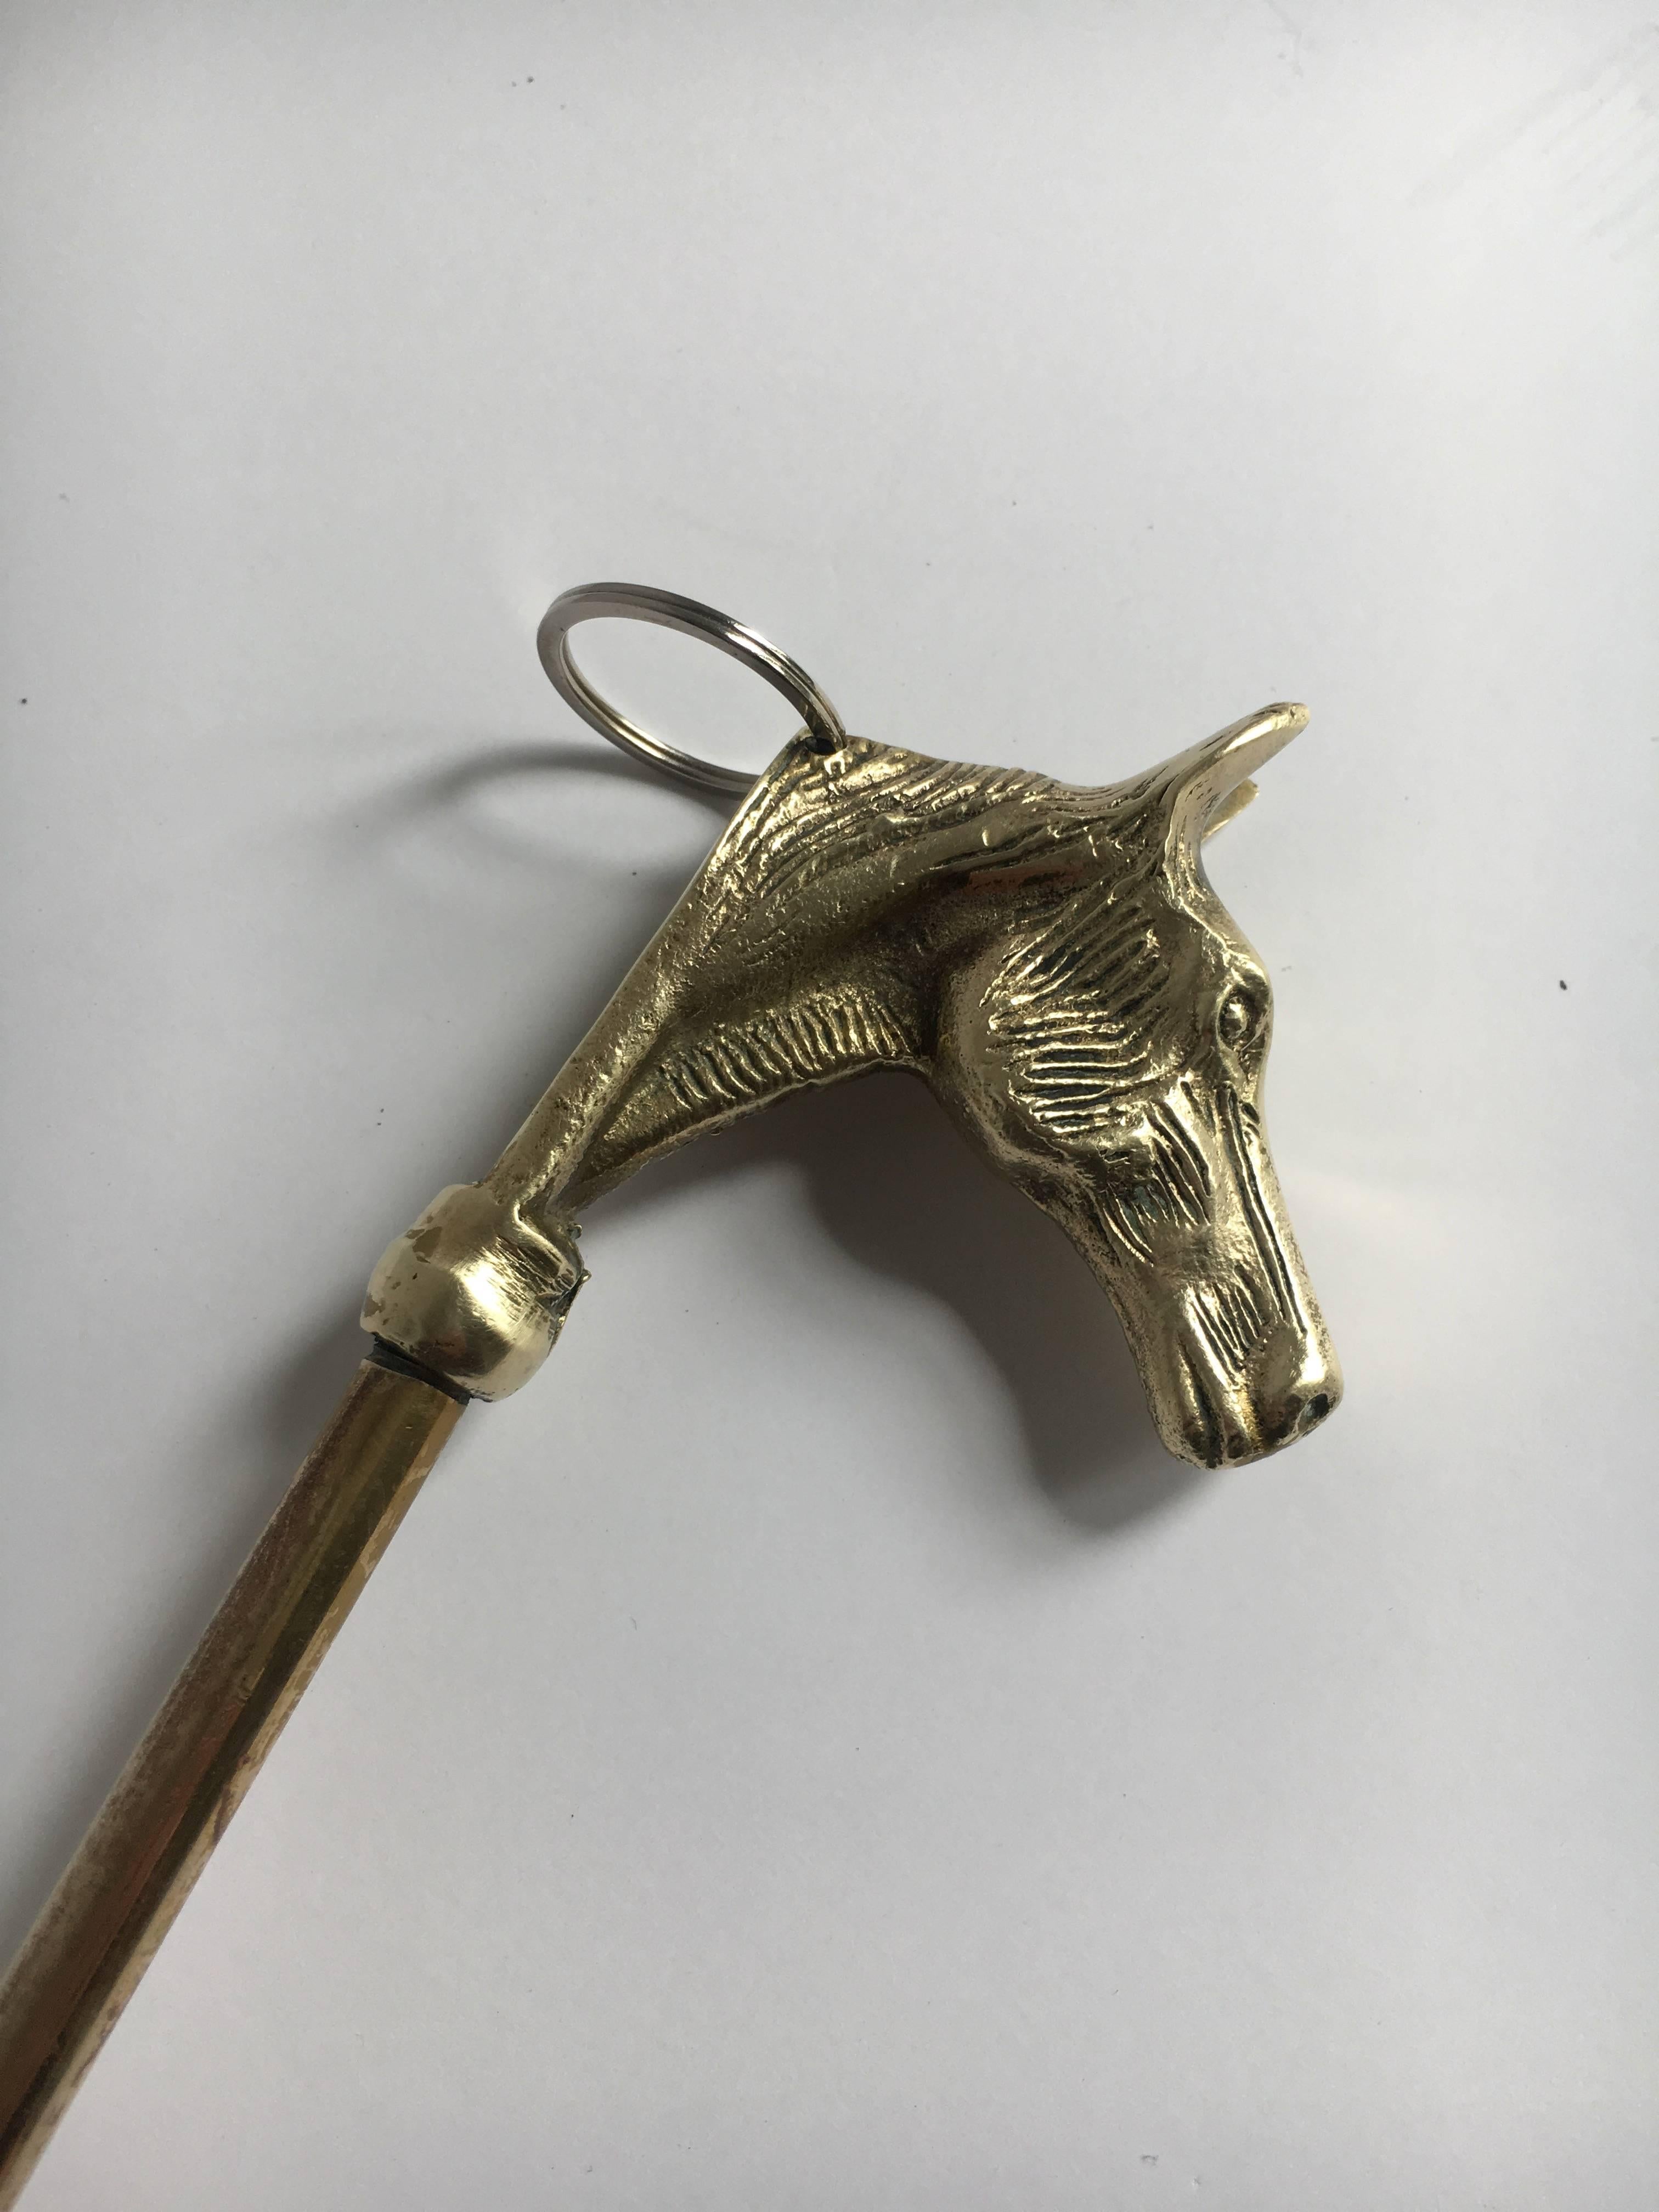 Brass Shoe Horn with Horse Final Hook - A handsome Shoe horn for the mens dressing room - large enough for the toughest of boots!